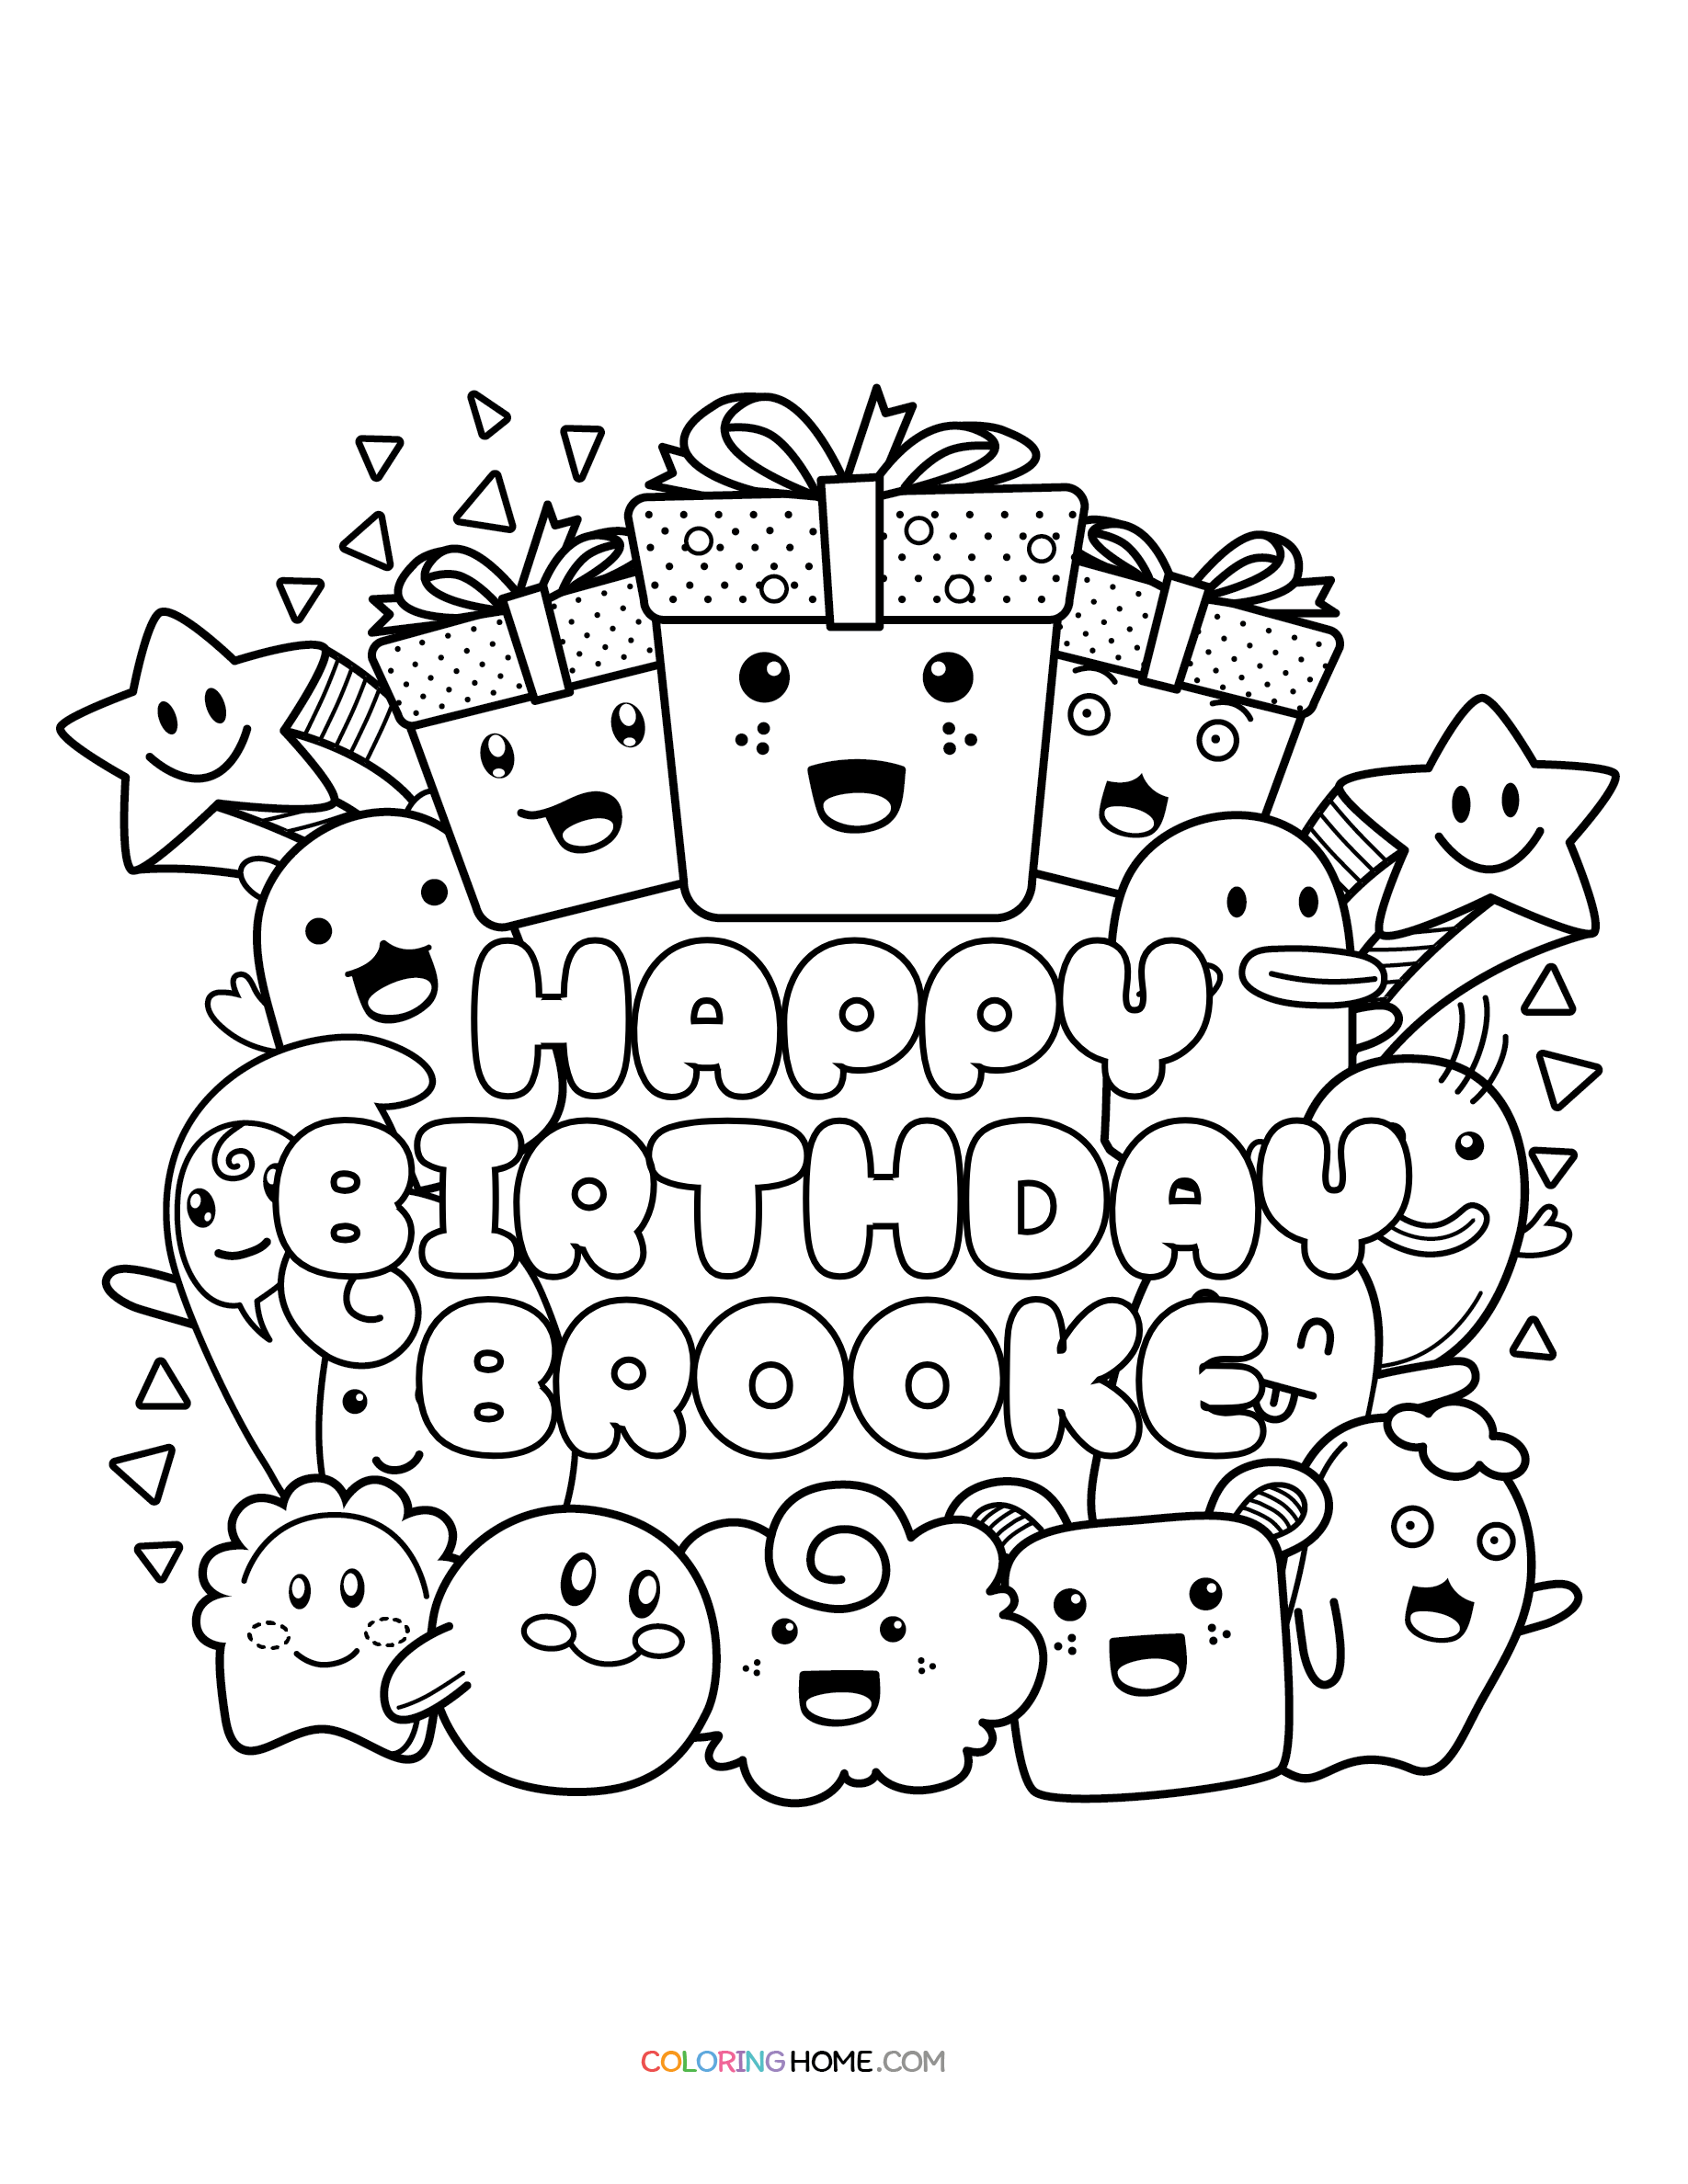 Happy Birthday Brooke coloring page